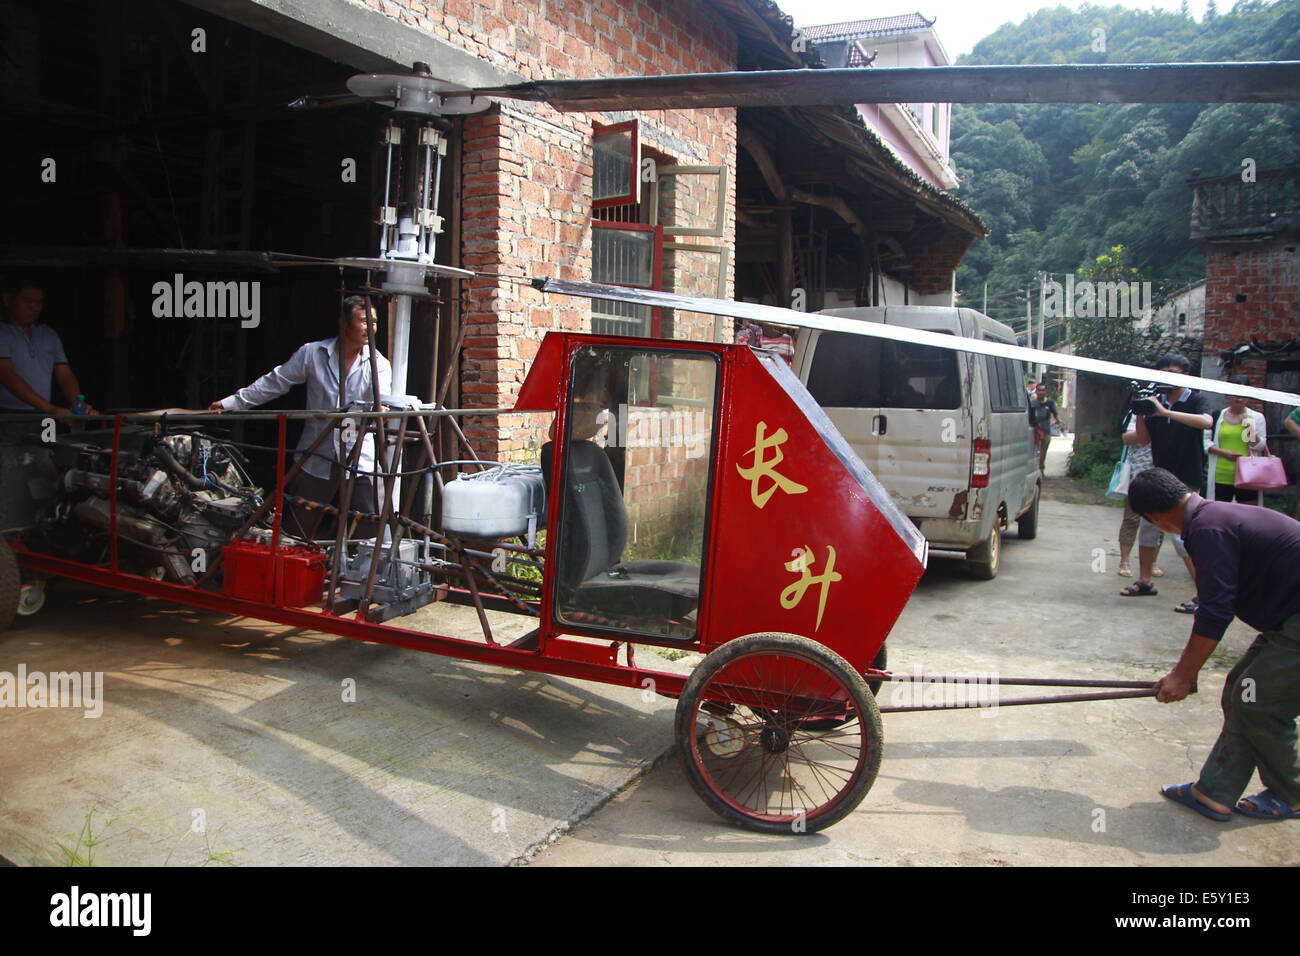 Dexing, China. 7th Aug, 2014. AUGUST 07: Jiang Changgen prepares for test flight at Dajia village on August 7, 2014 in Dexing, Jiangxi Province of China. 52-year-old Jiang Changgen spent two years and 100,000 yuan (16,200 USD) making the coaxial helicopter. The helicopter is 4 meters long, 2.65 meters tall and weighs 900 kilograms. Its rotor blade is eight meters long. Jiang tried more than ten minutes, but he didn't succeed. Credit:  SIPA Asia/ZUMA Wire/Alamy Live News Stock Photo